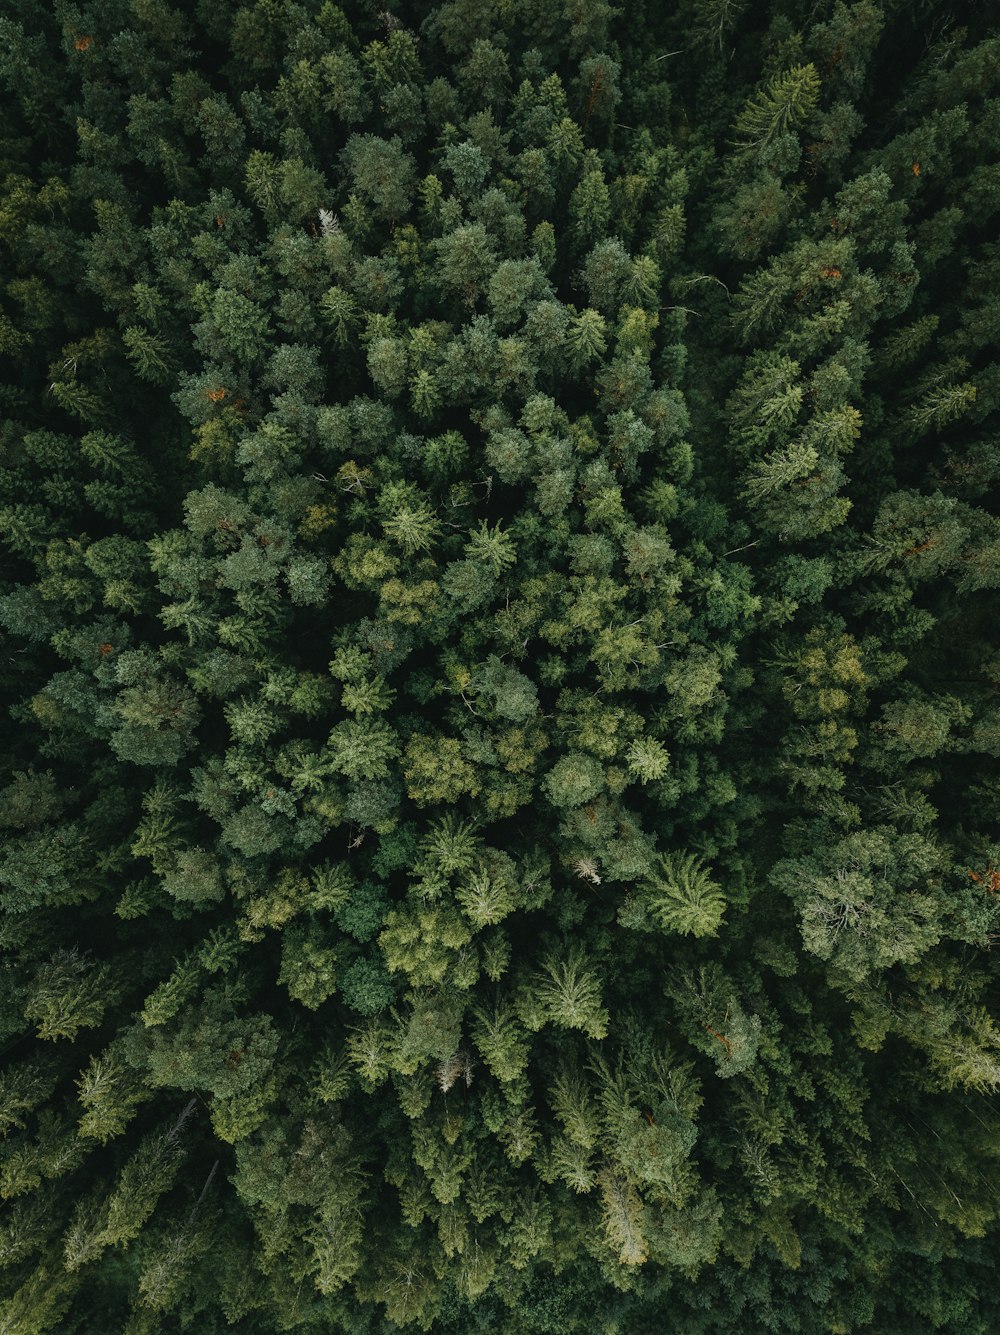 an aerial view of a forest from above